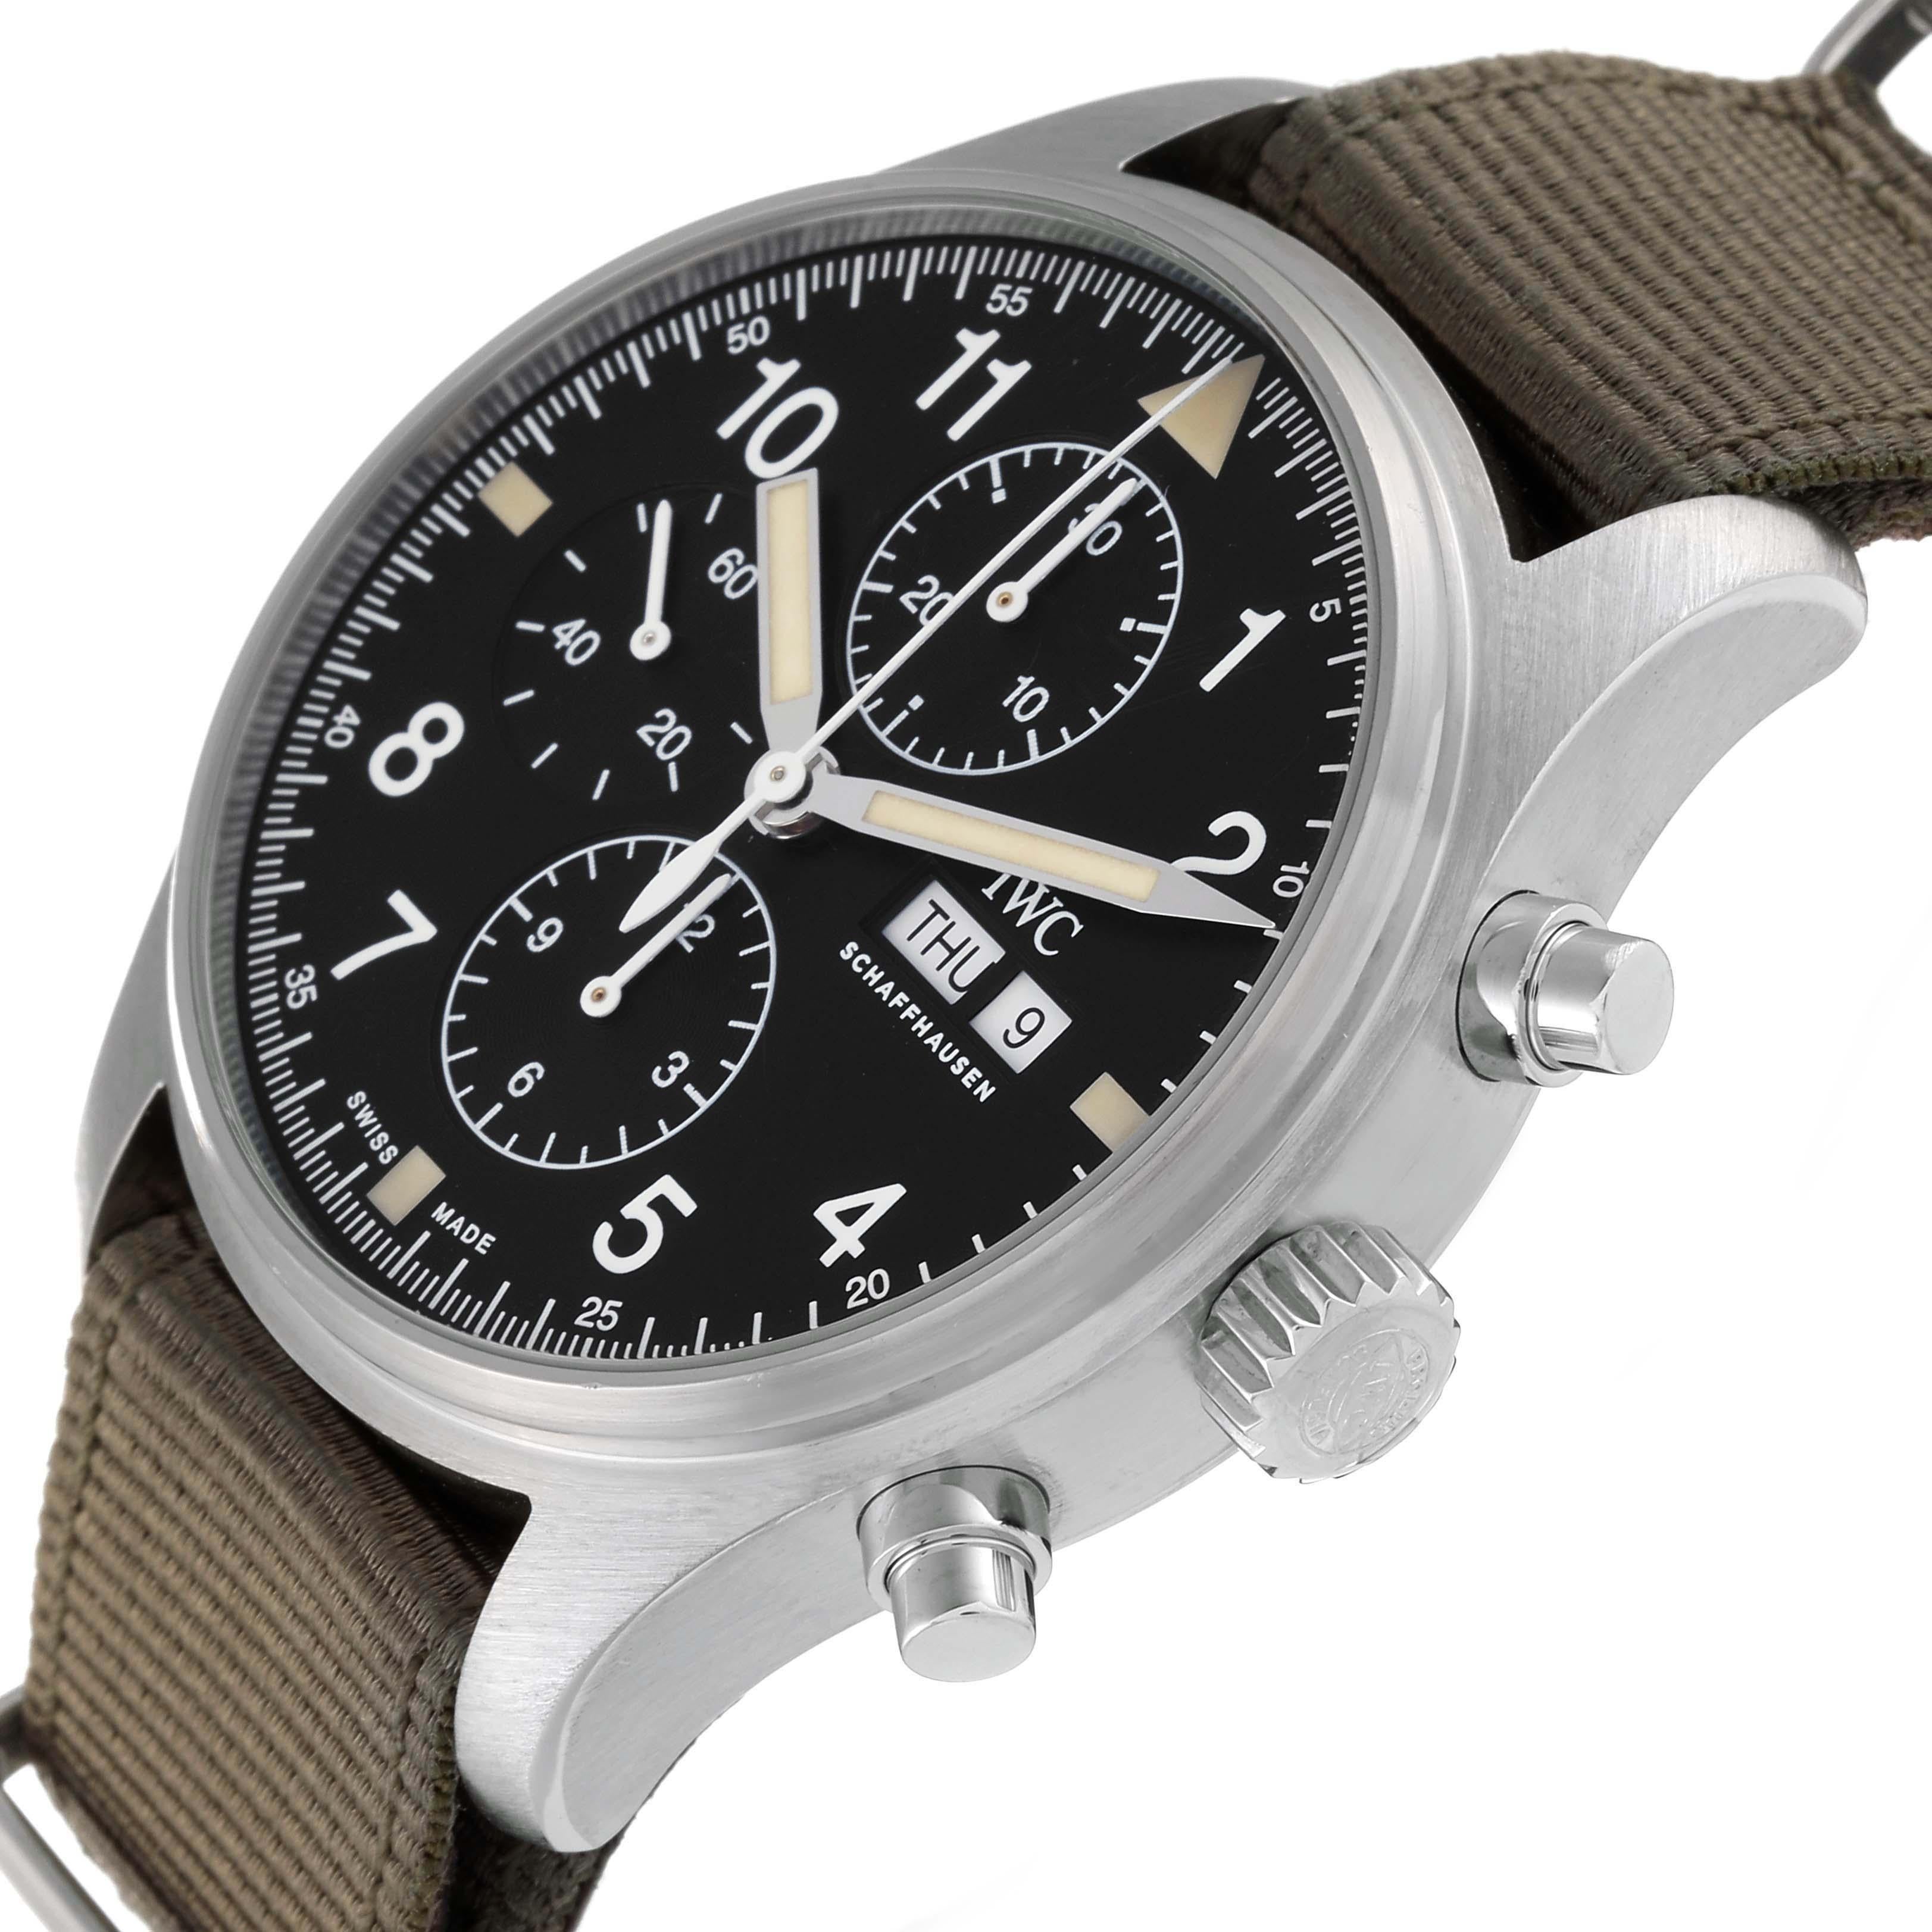 Men's IWC Spitfire Pilot Steel Black Dial Chronograph Mens Watch IW377724 Box Card For Sale